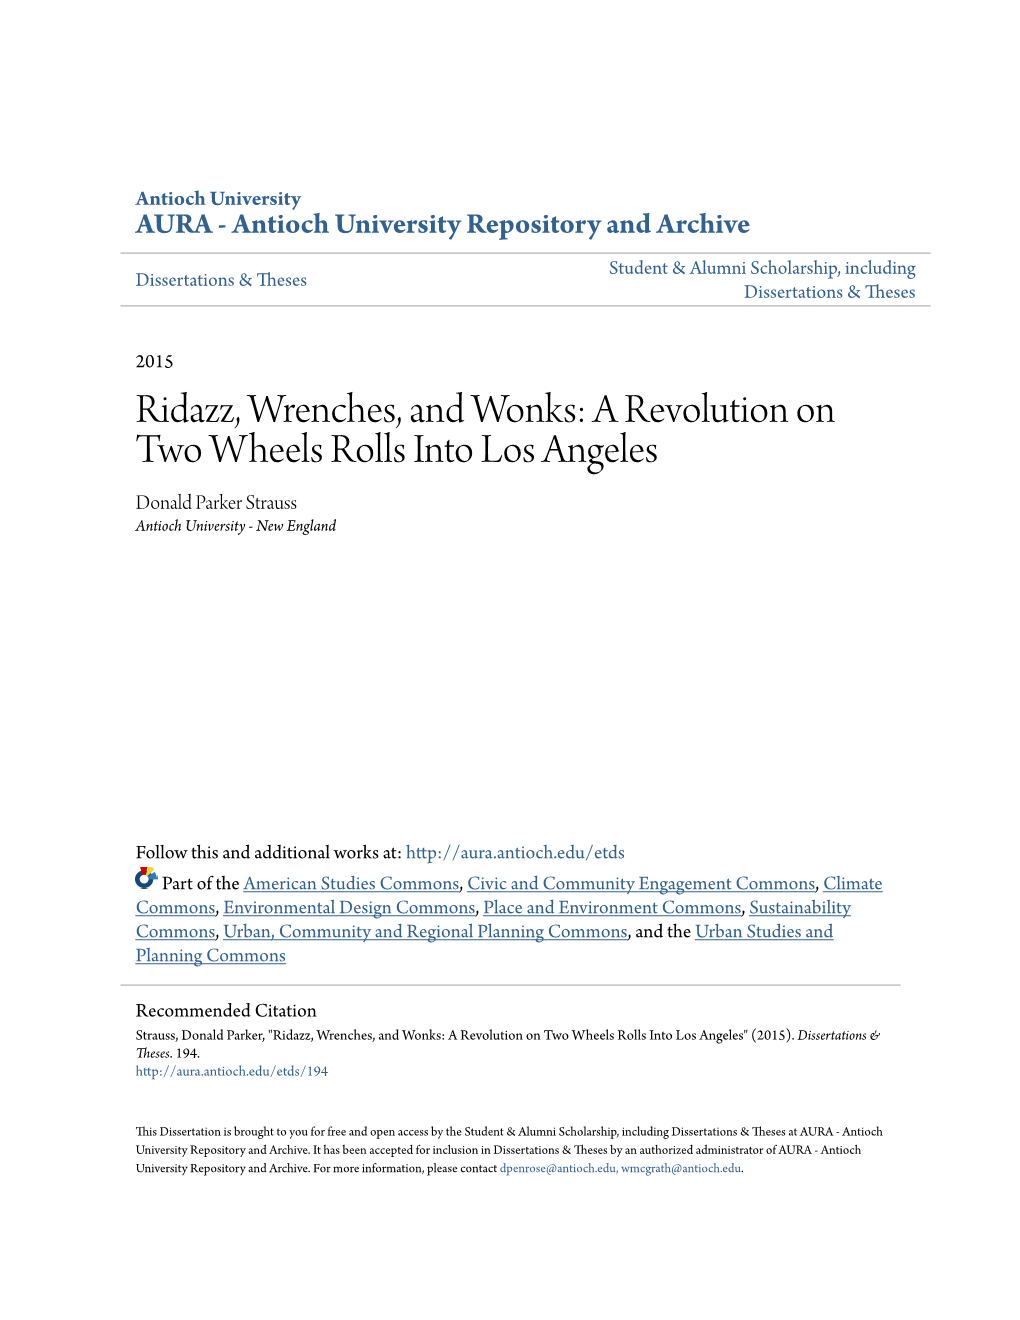 Ridazz, Wrenches, and Wonks: a Revolution on Two Wheels Rolls Into Los Angeles Donald Parker Strauss Antioch University - New England